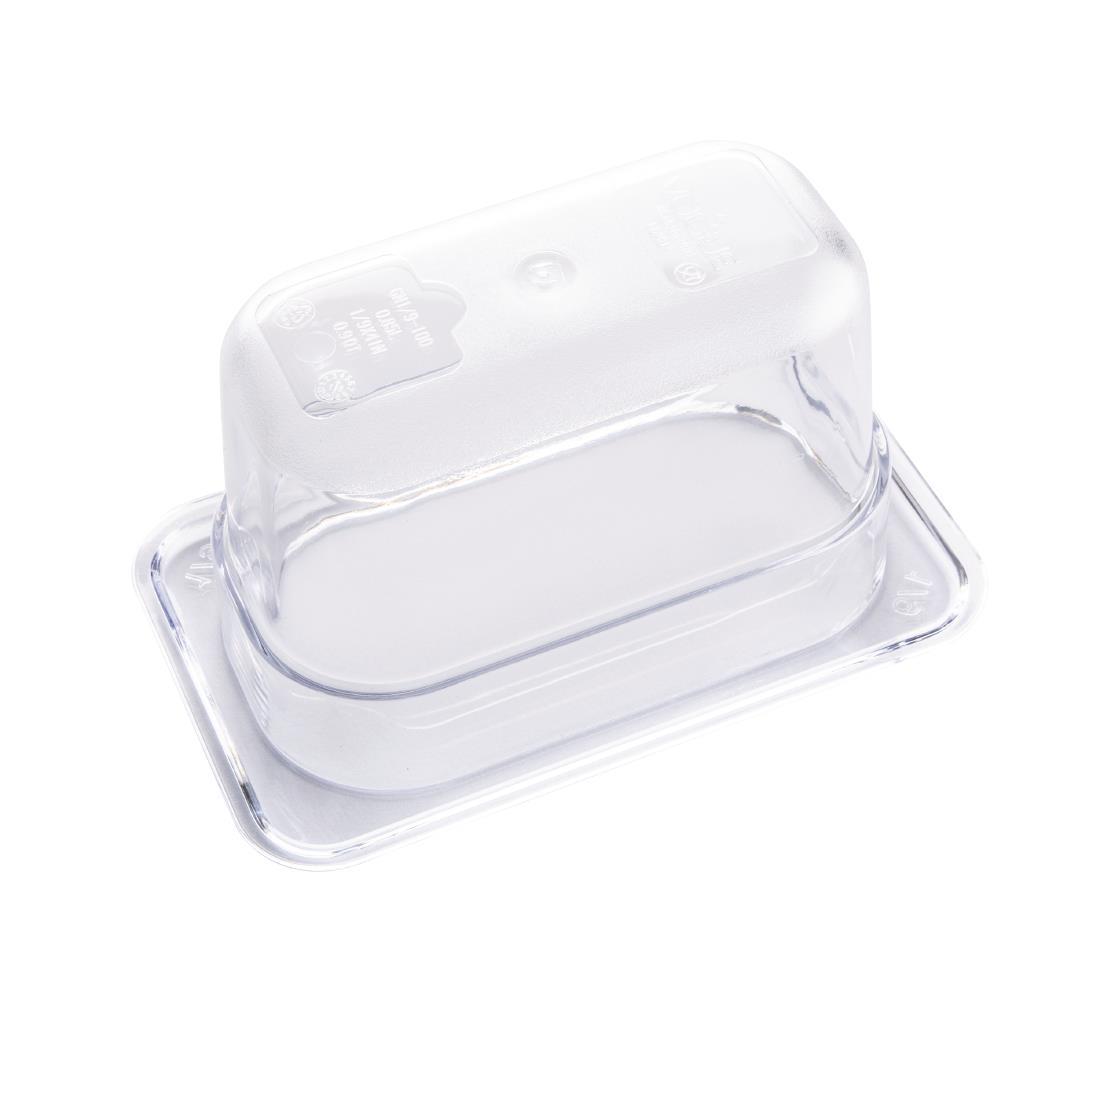 Vogue Polycarbonate 1/9 Gastronorm Container 100mm Clear - U243  - 4